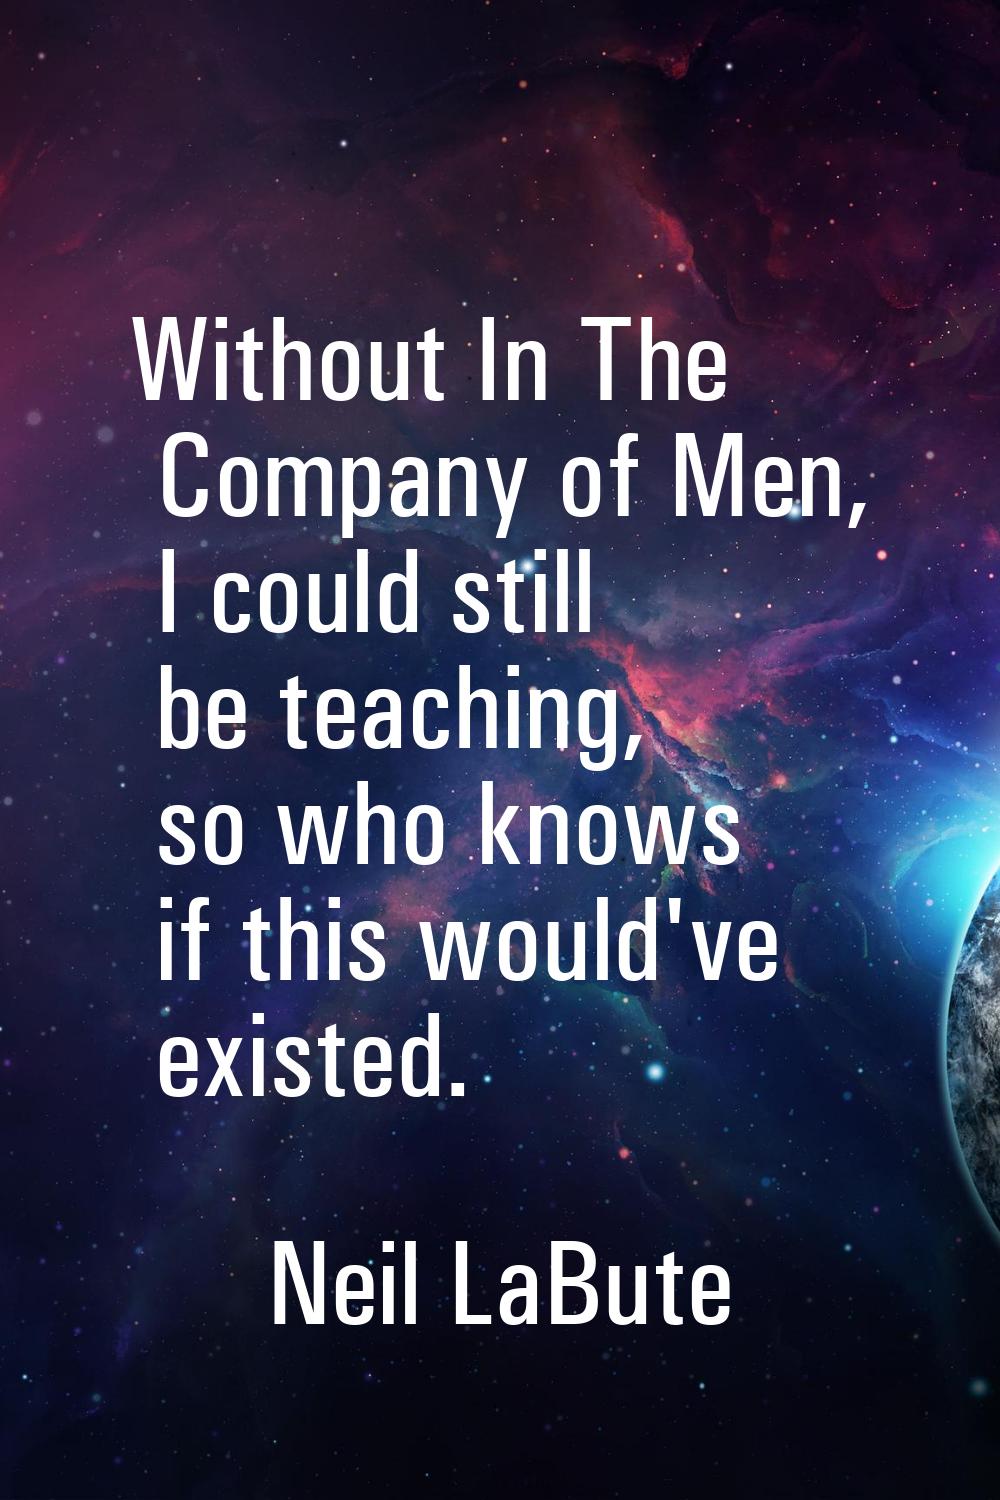 Without In The Company of Men, I could still be teaching, so who knows if this would've existed.